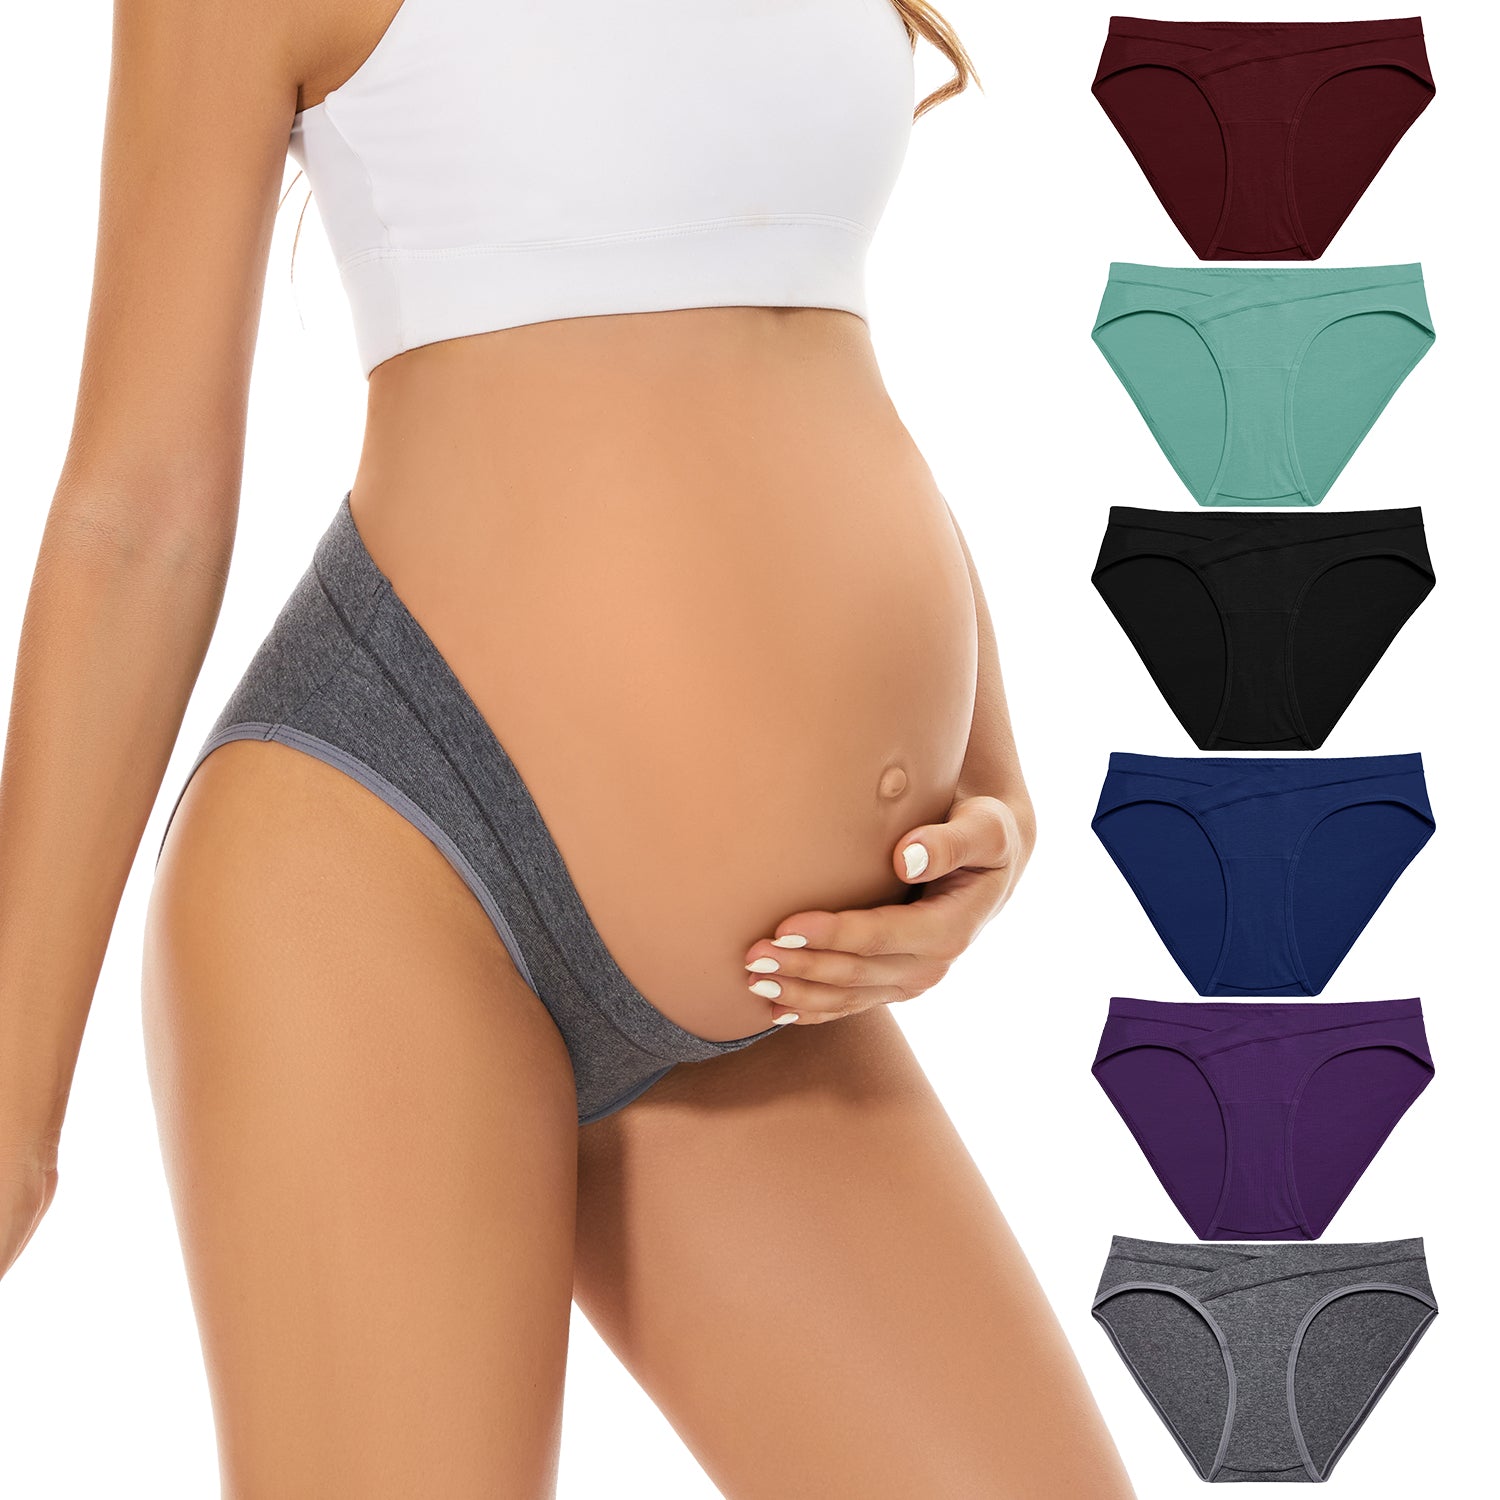 Buy MATERNITY Over The Bump Full Knickers 3 Pack S, Maternity